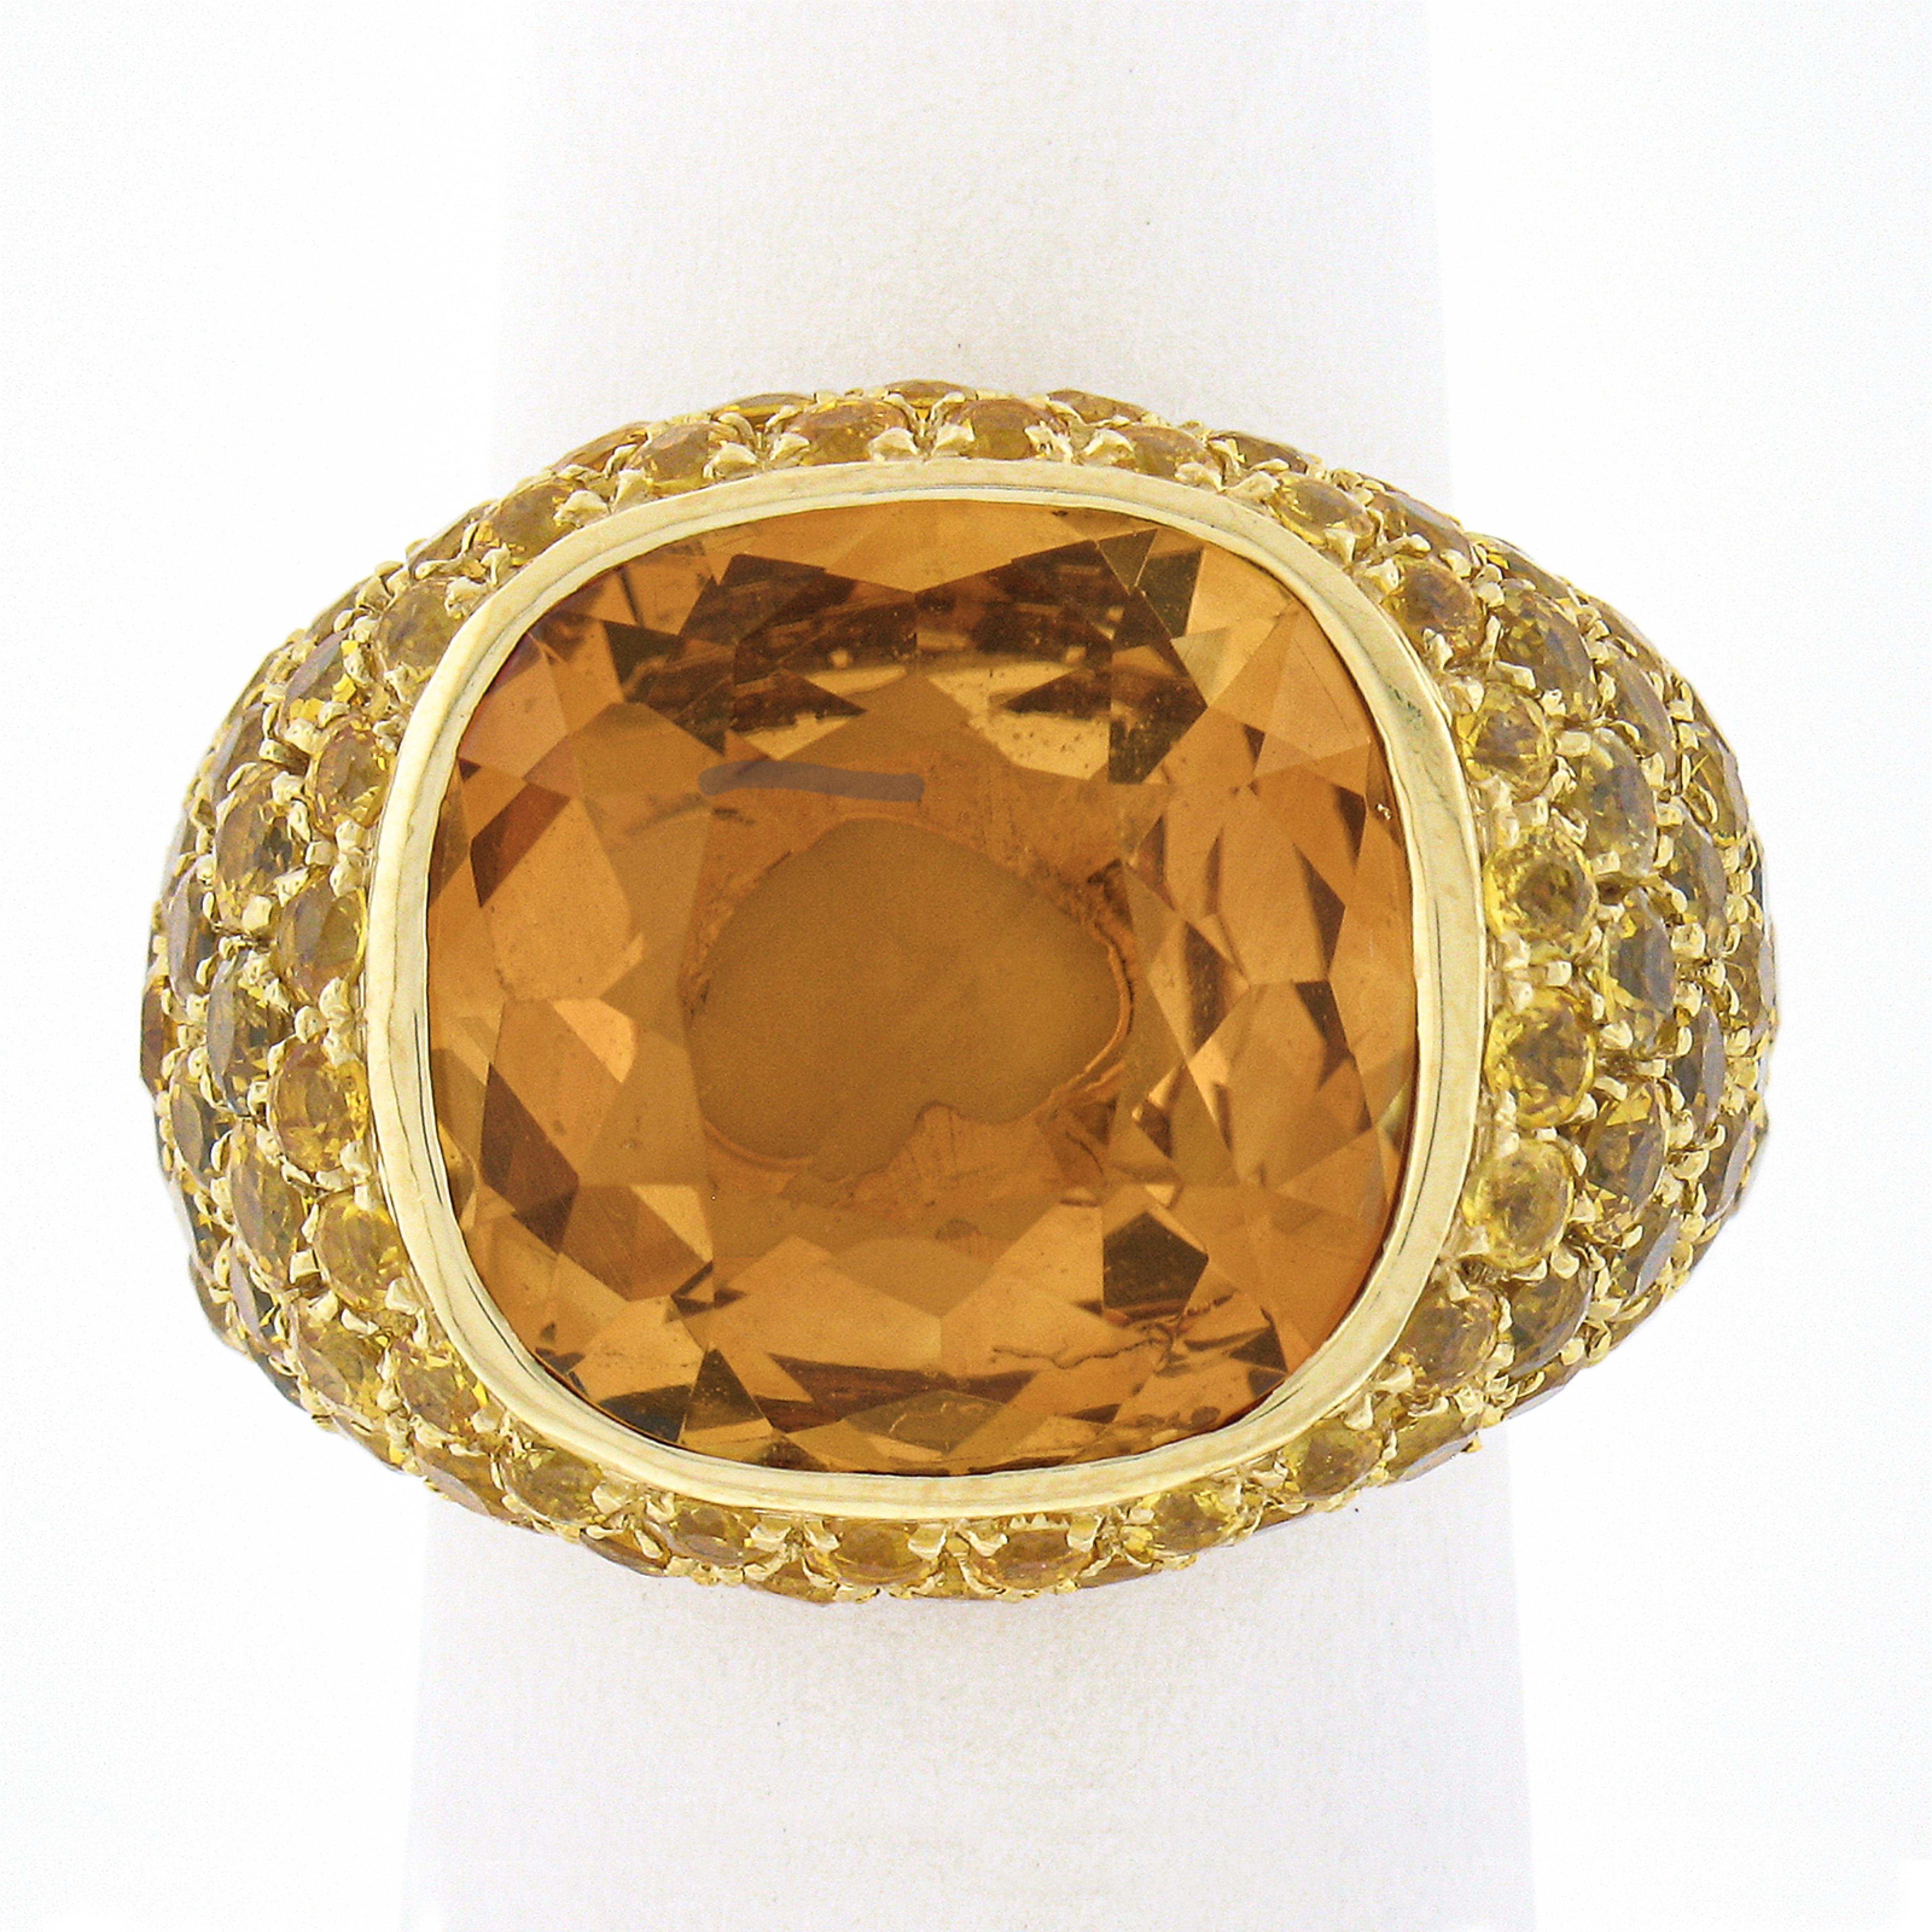 This stunning fancy cocktail ring is crafted in solid 18k yellow gold by Pasquale Bruni and features a large citrine stone bezel set at its center. This outstanding citrine shows amazing, absolutely rich orange color that gives a pleasant and truly